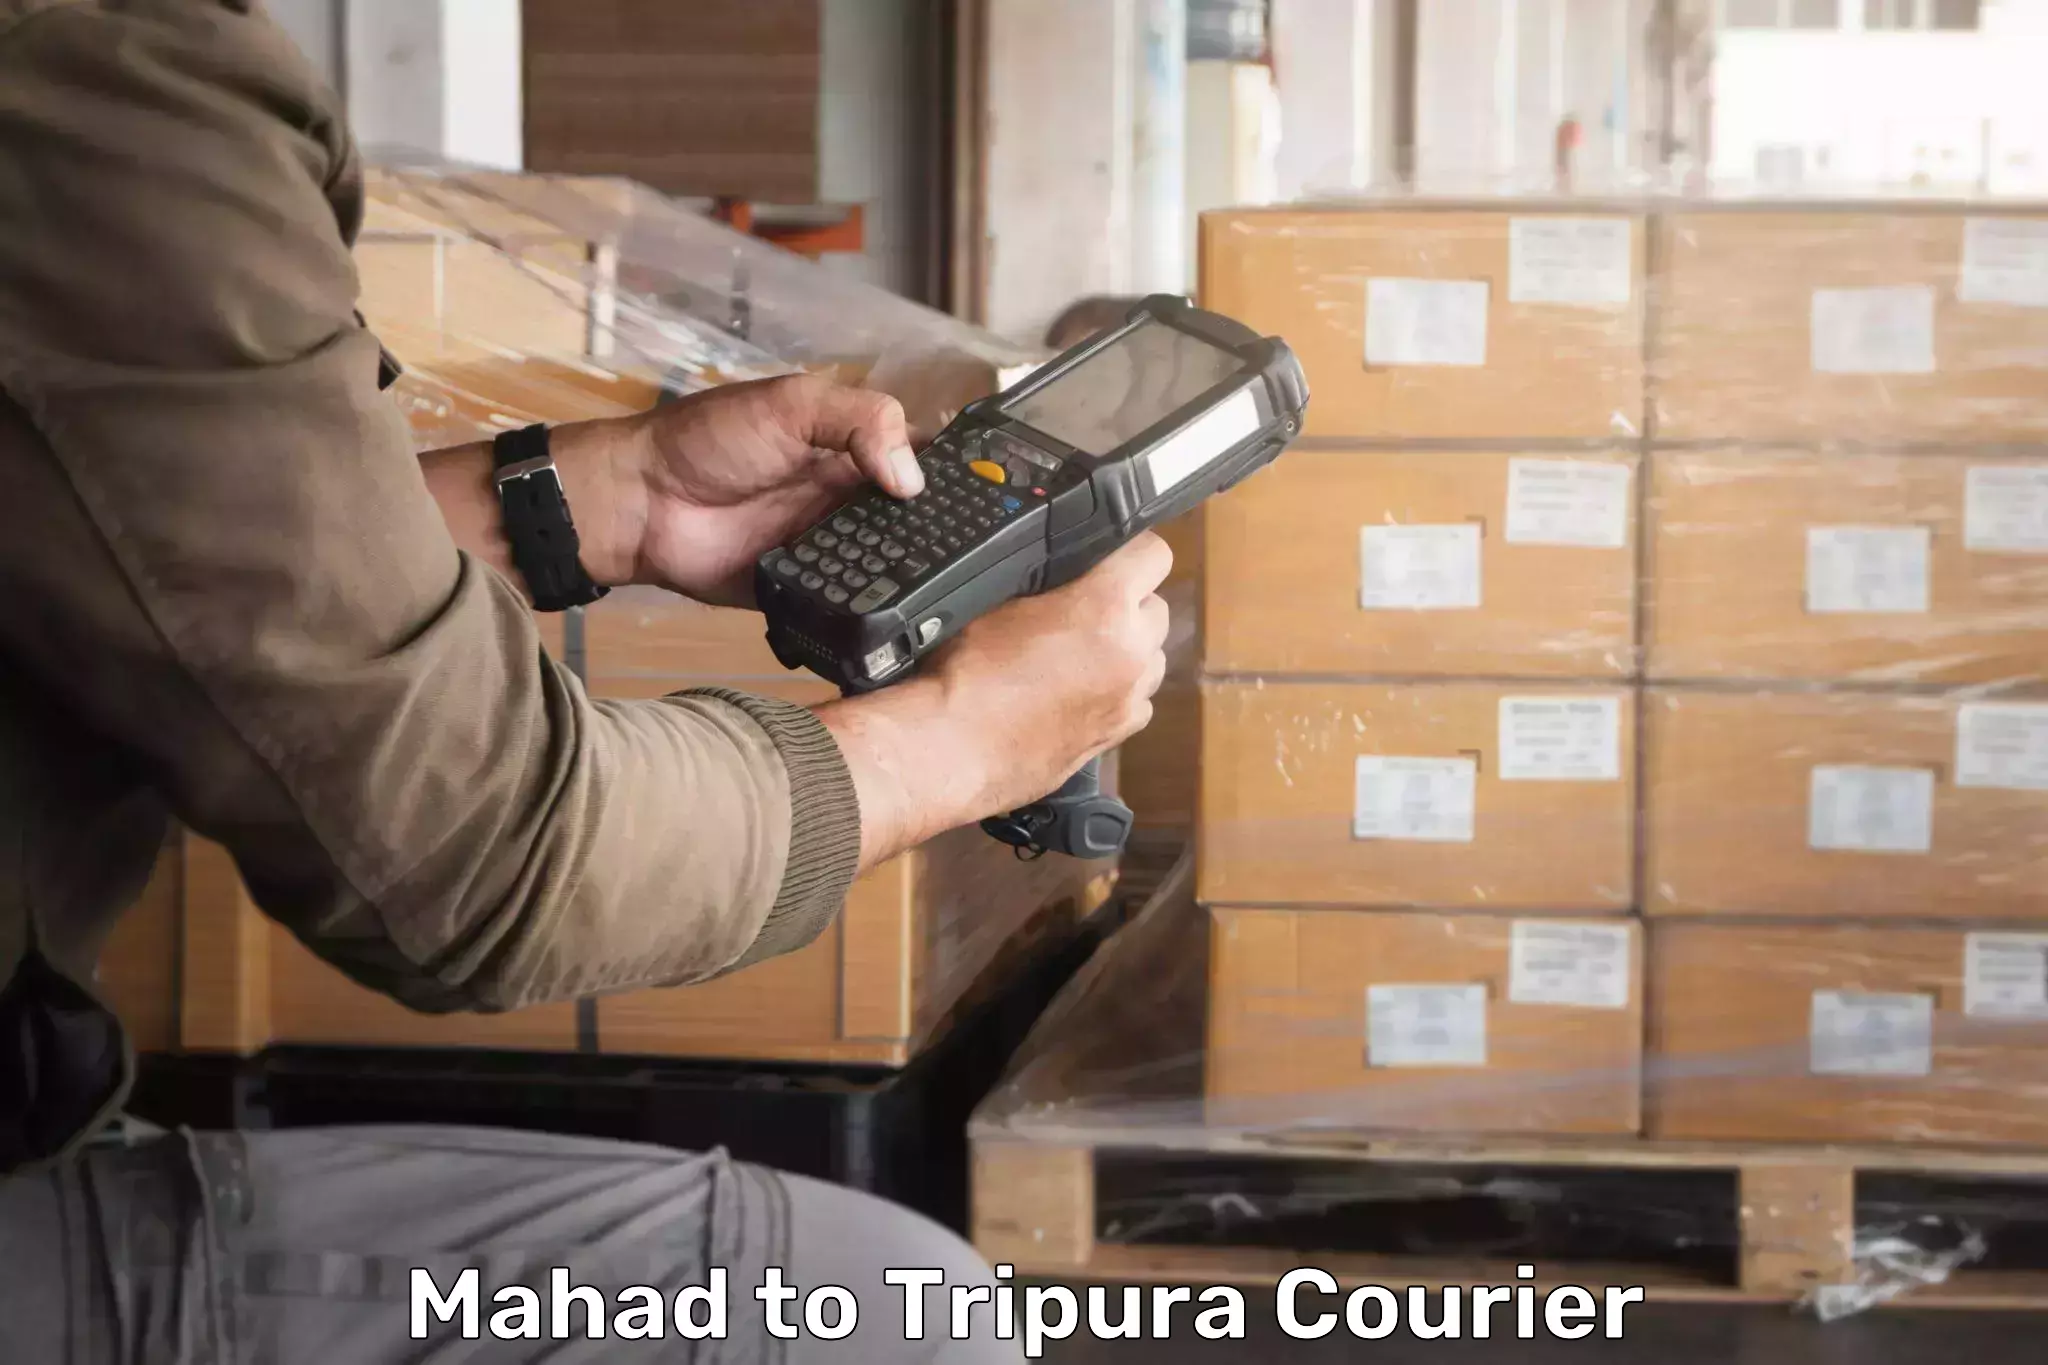 Flexible delivery scheduling Mahad to Agartala